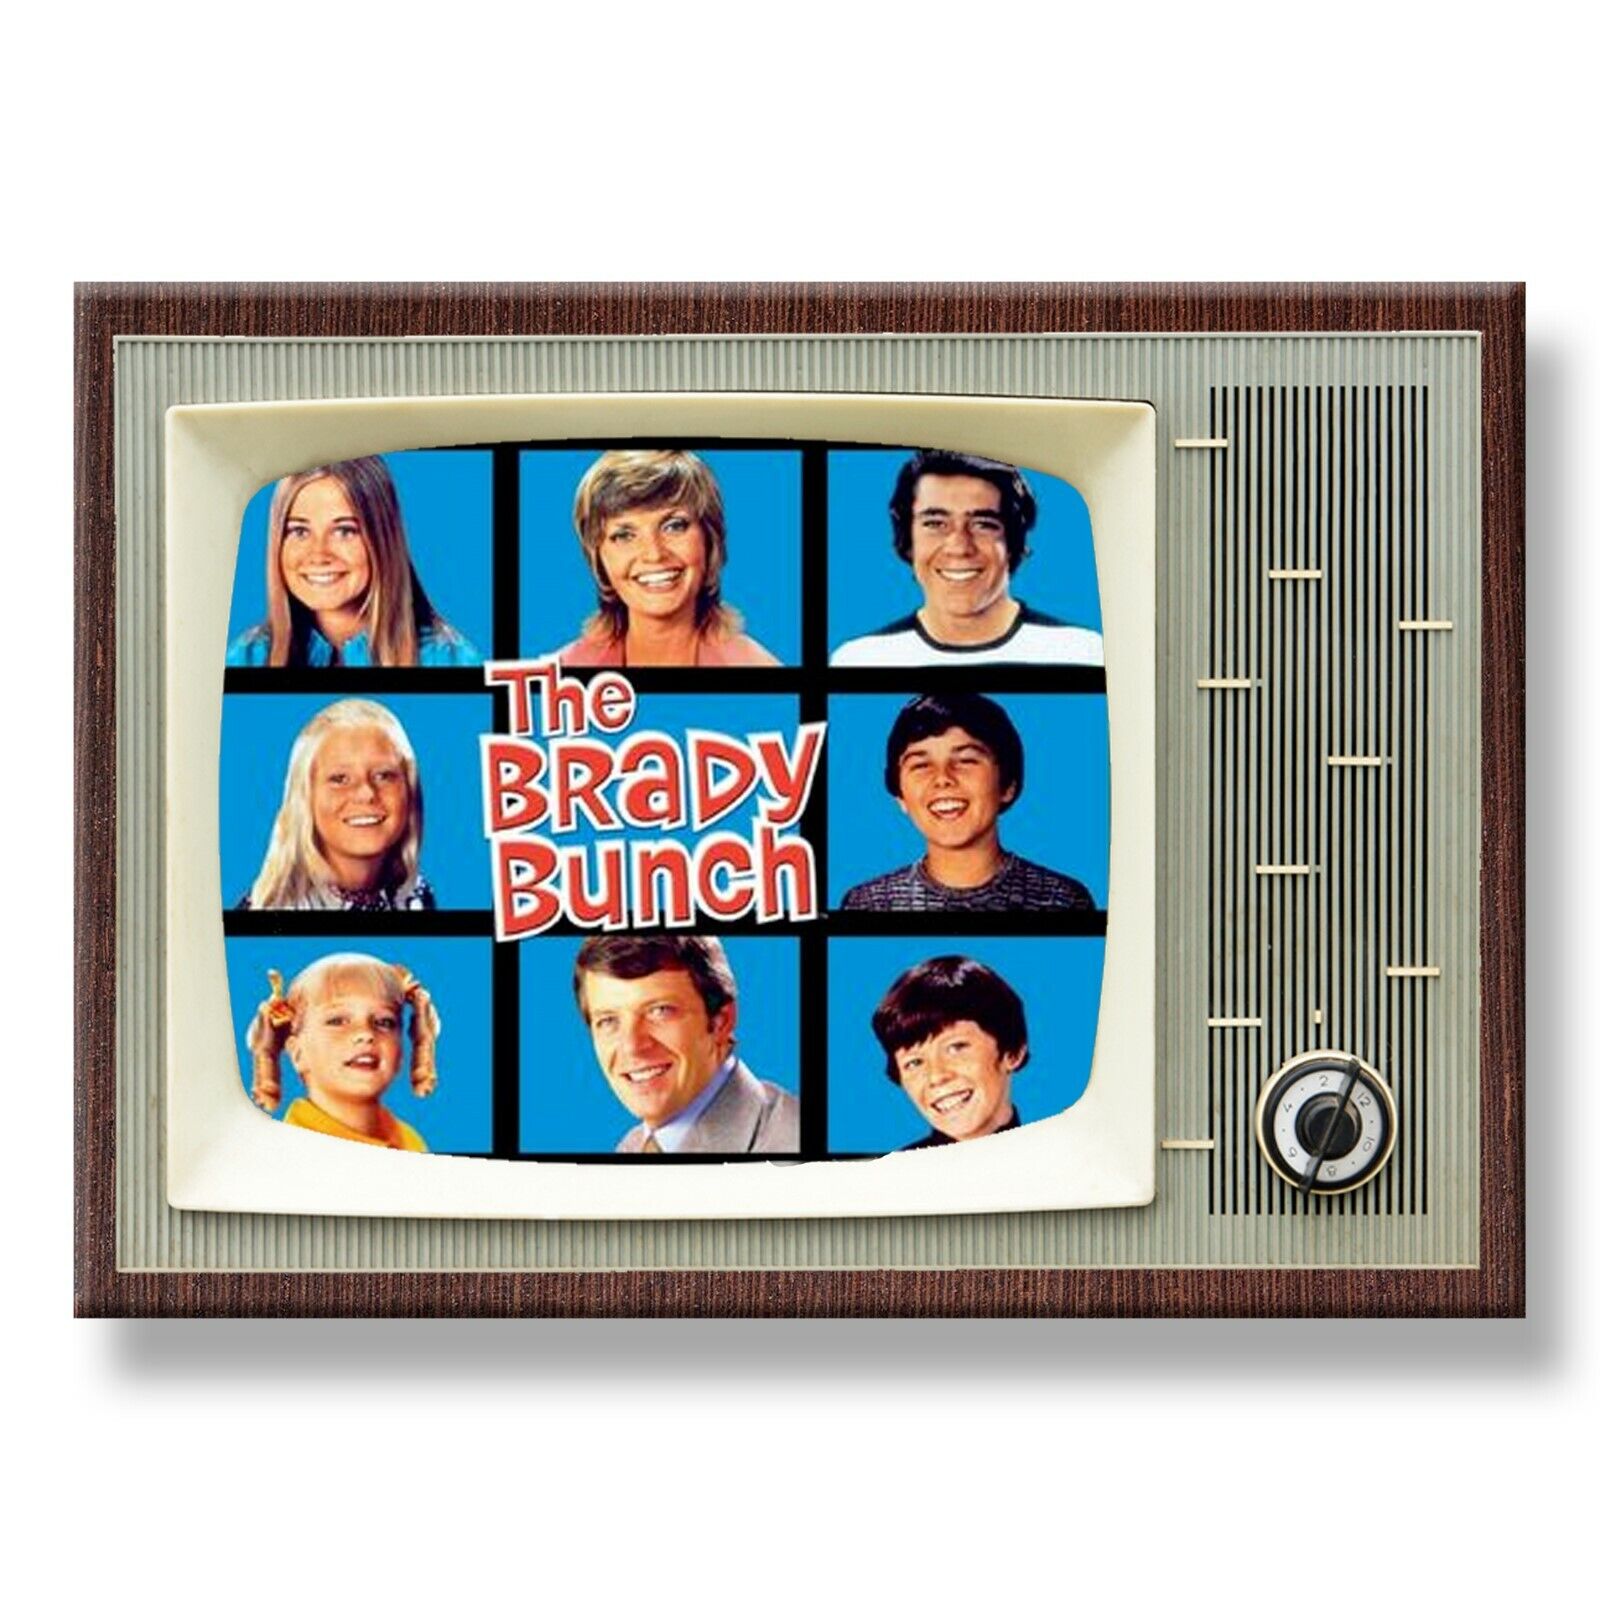 THE BRADY BUNCH TV 3.5 inches x 2.5 inches FRIDGE MAGNET